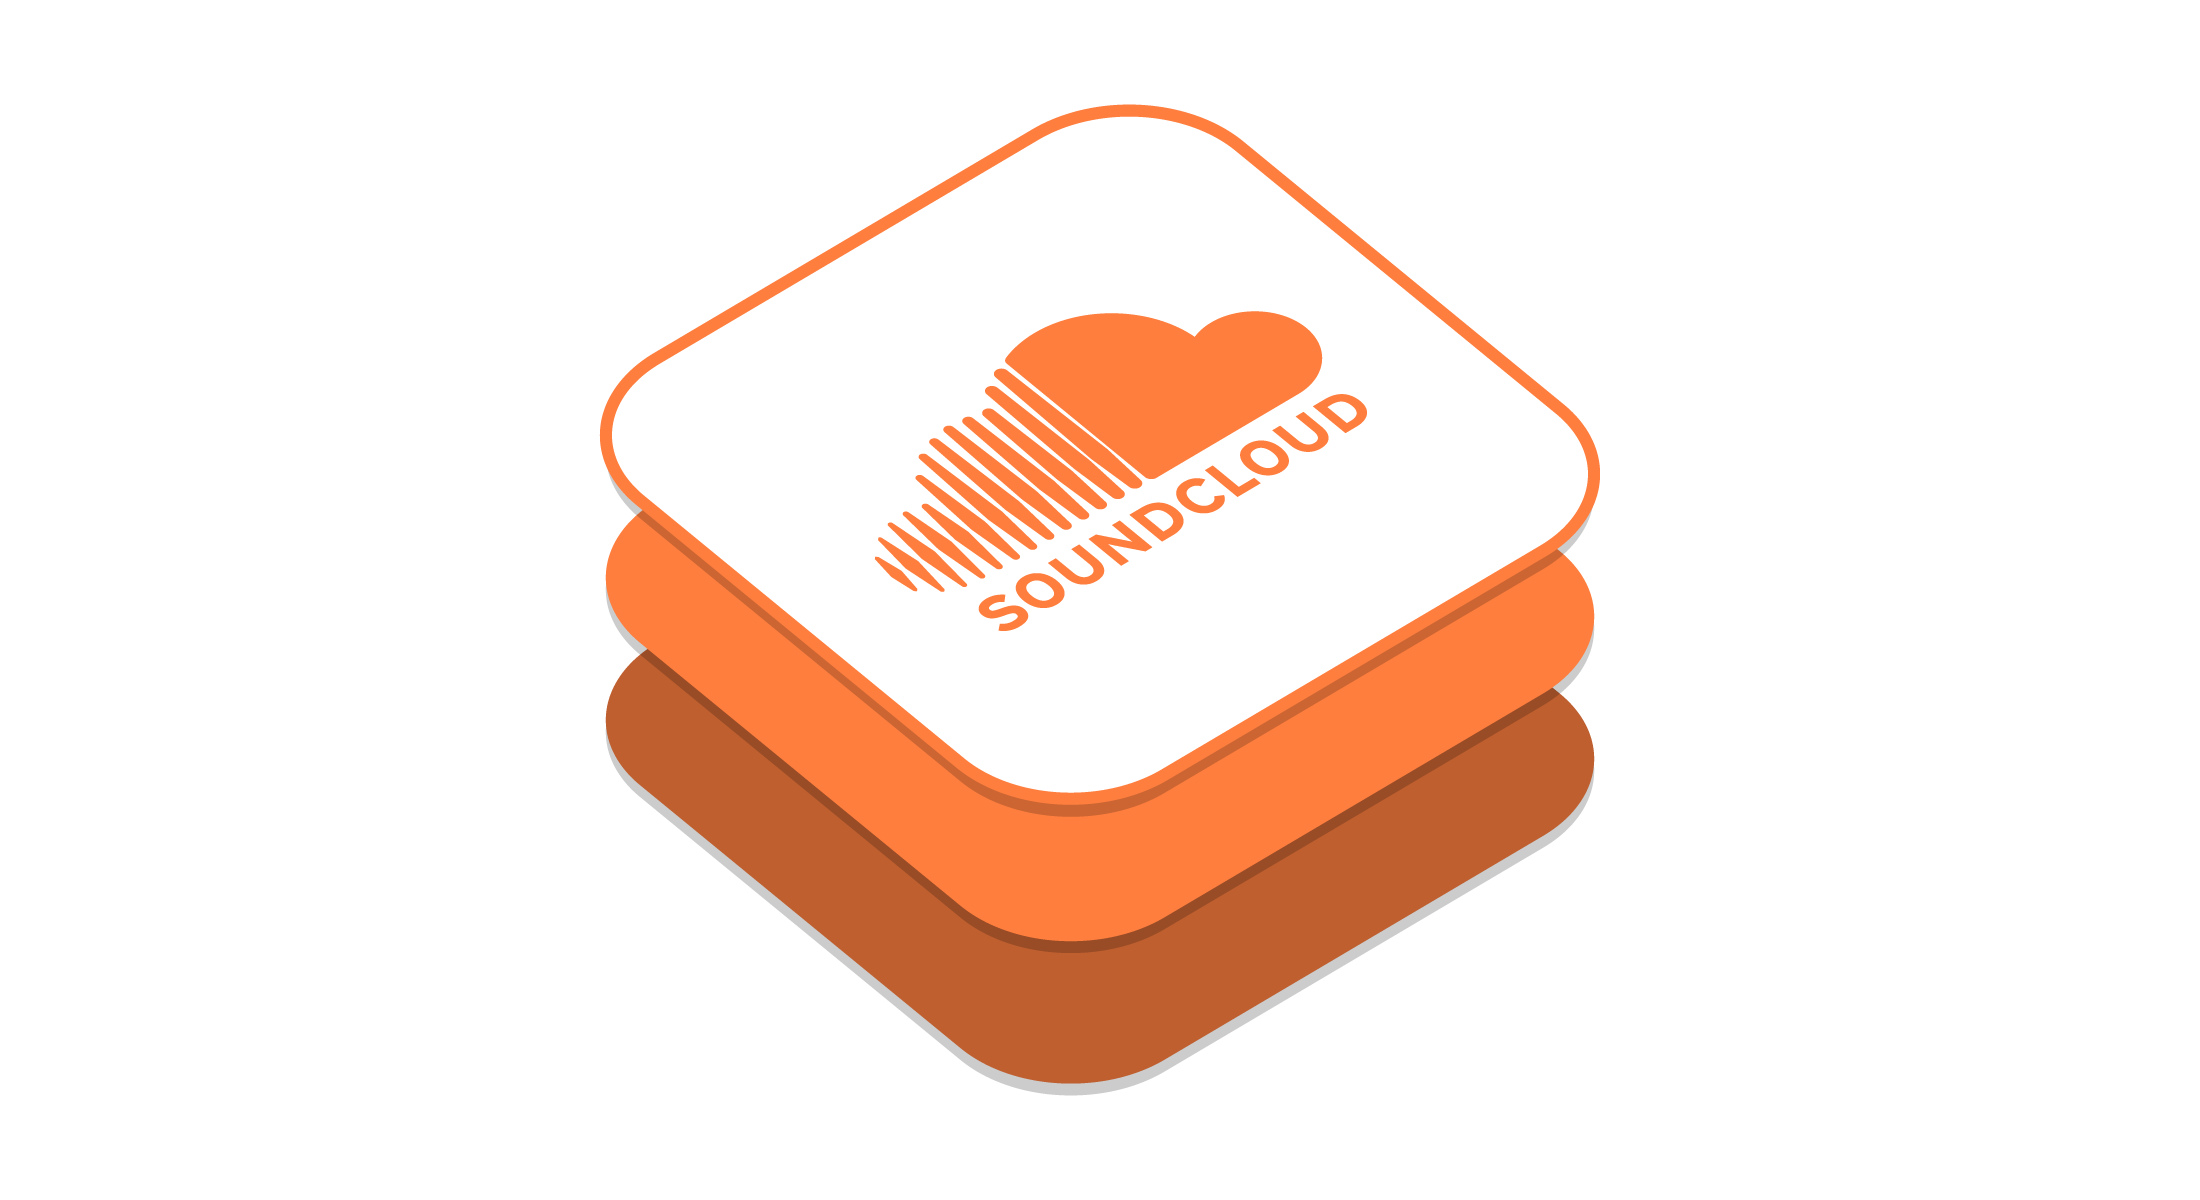 Soundcloud rethought the start page with clever playlists and curatorial music collections